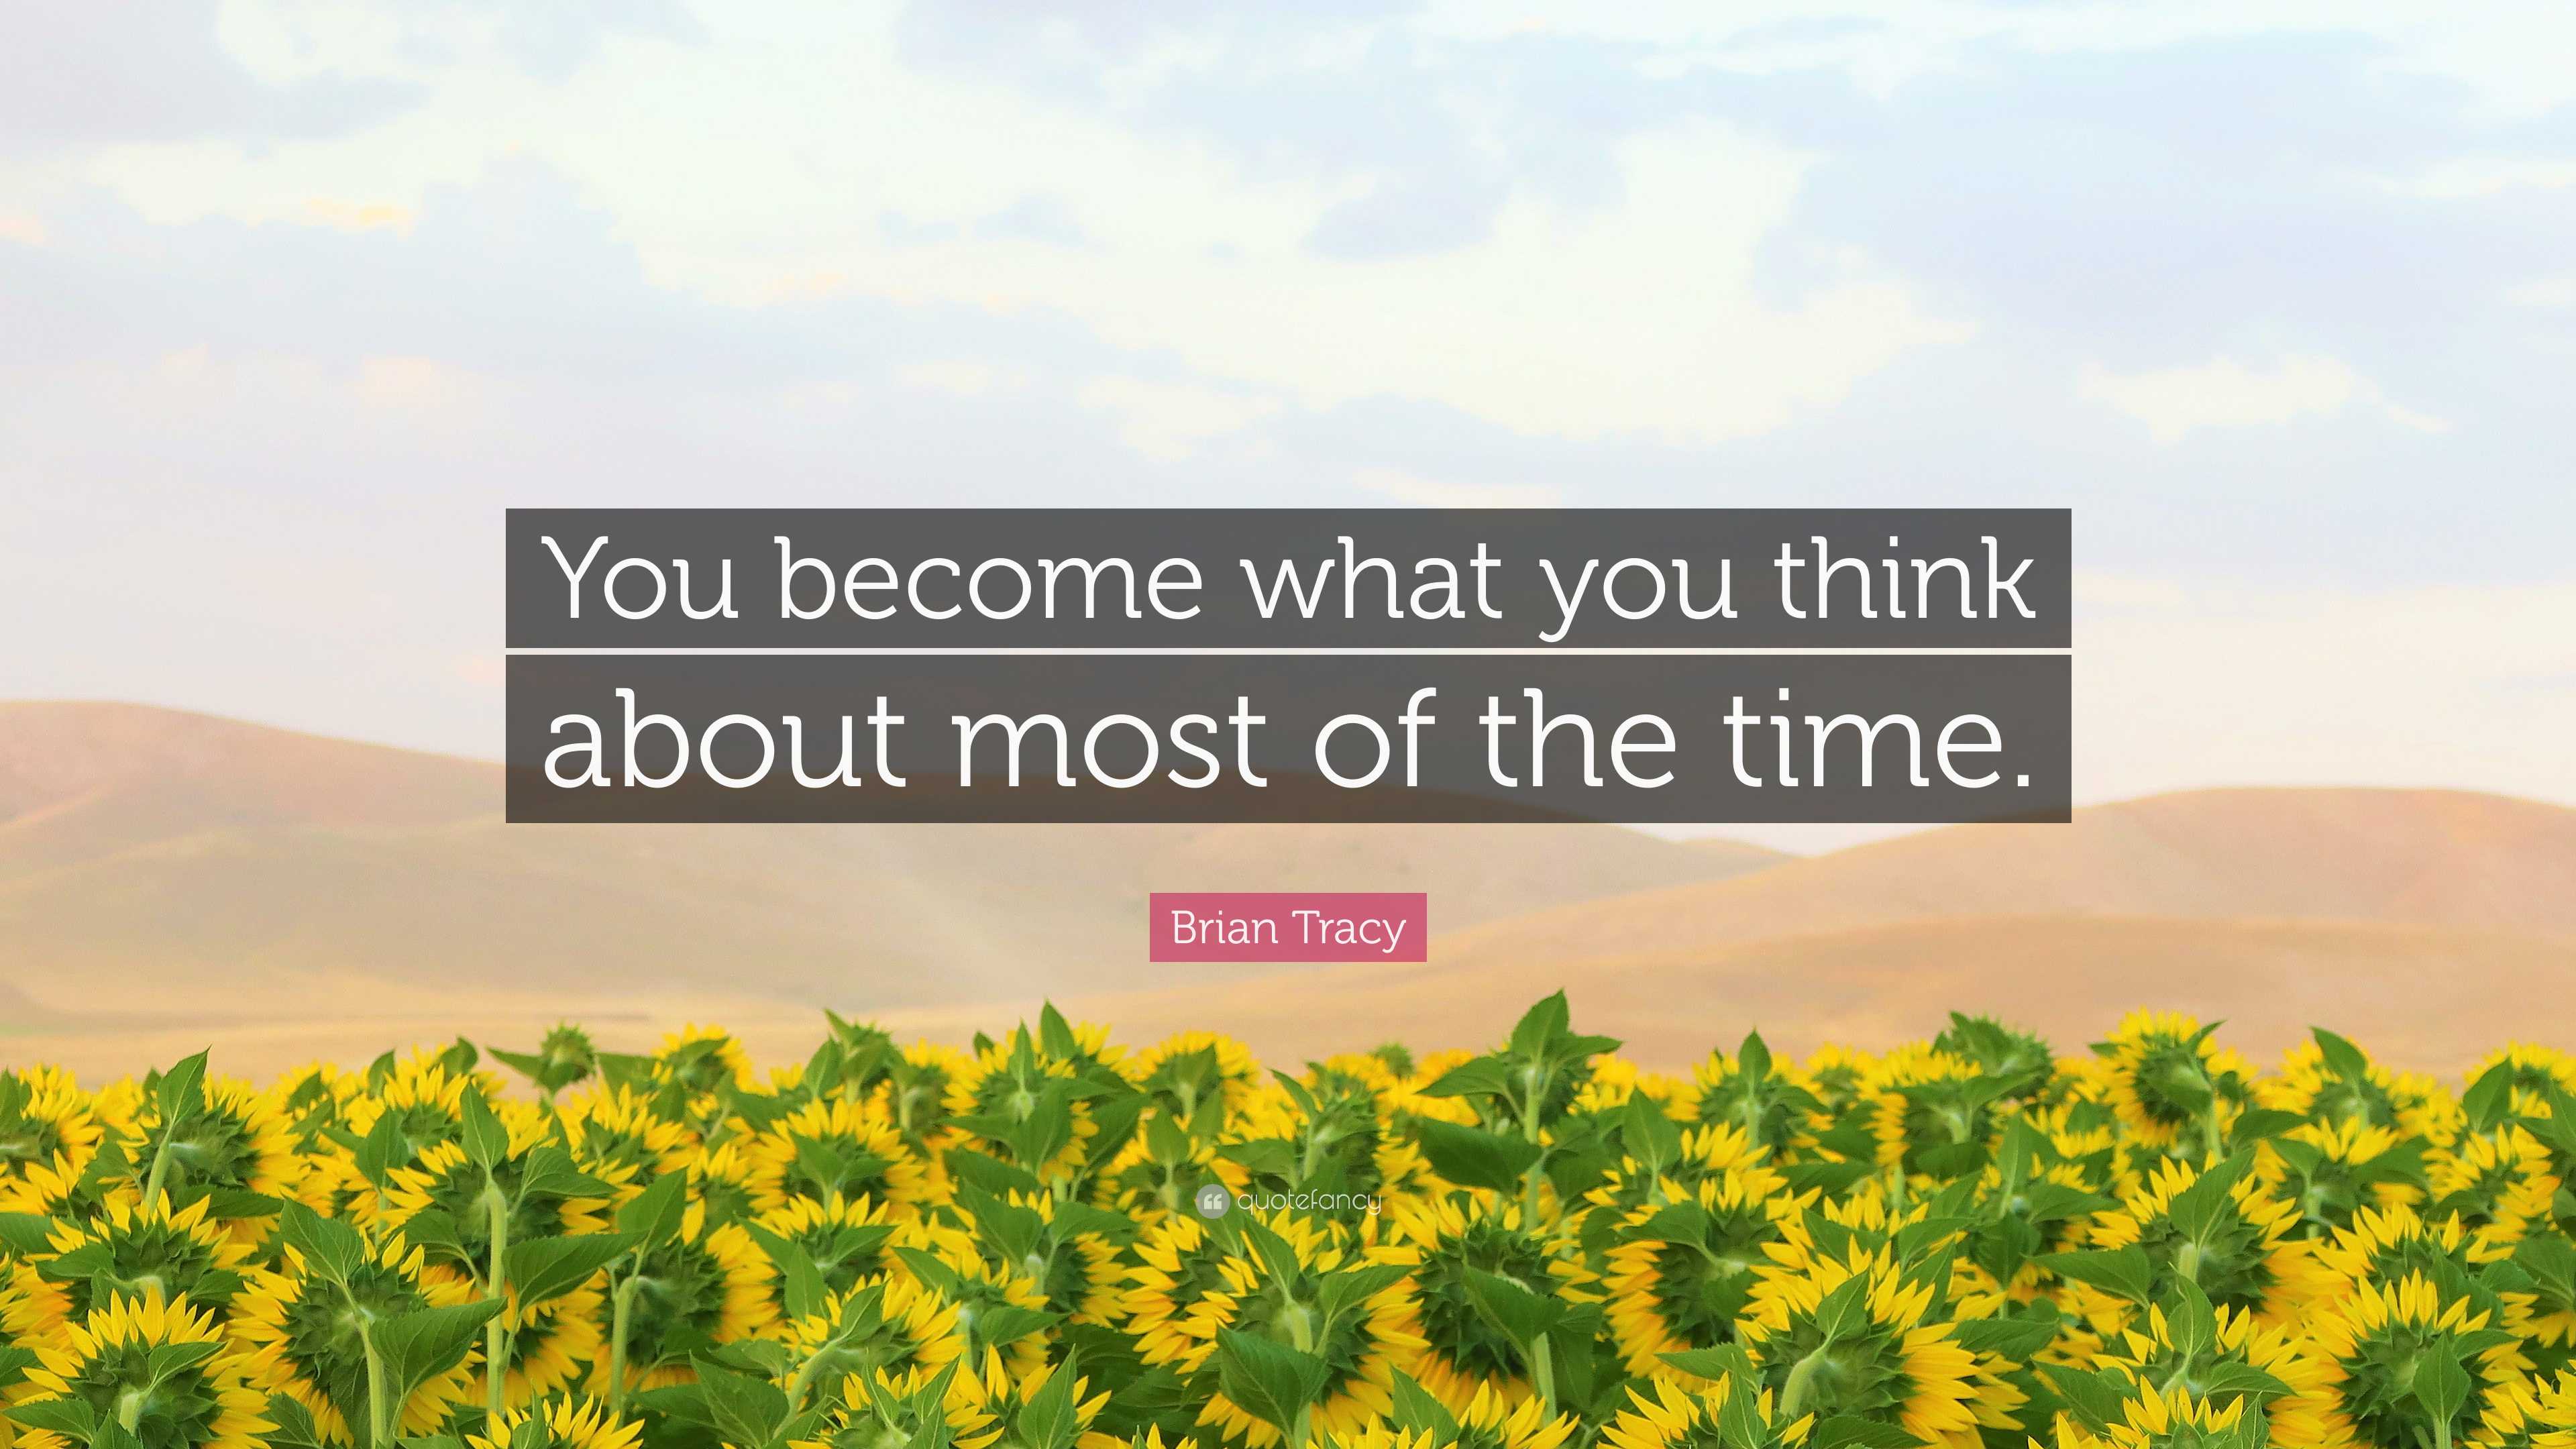 Brian Tracy Quote: “You become what you think about most of the time.”